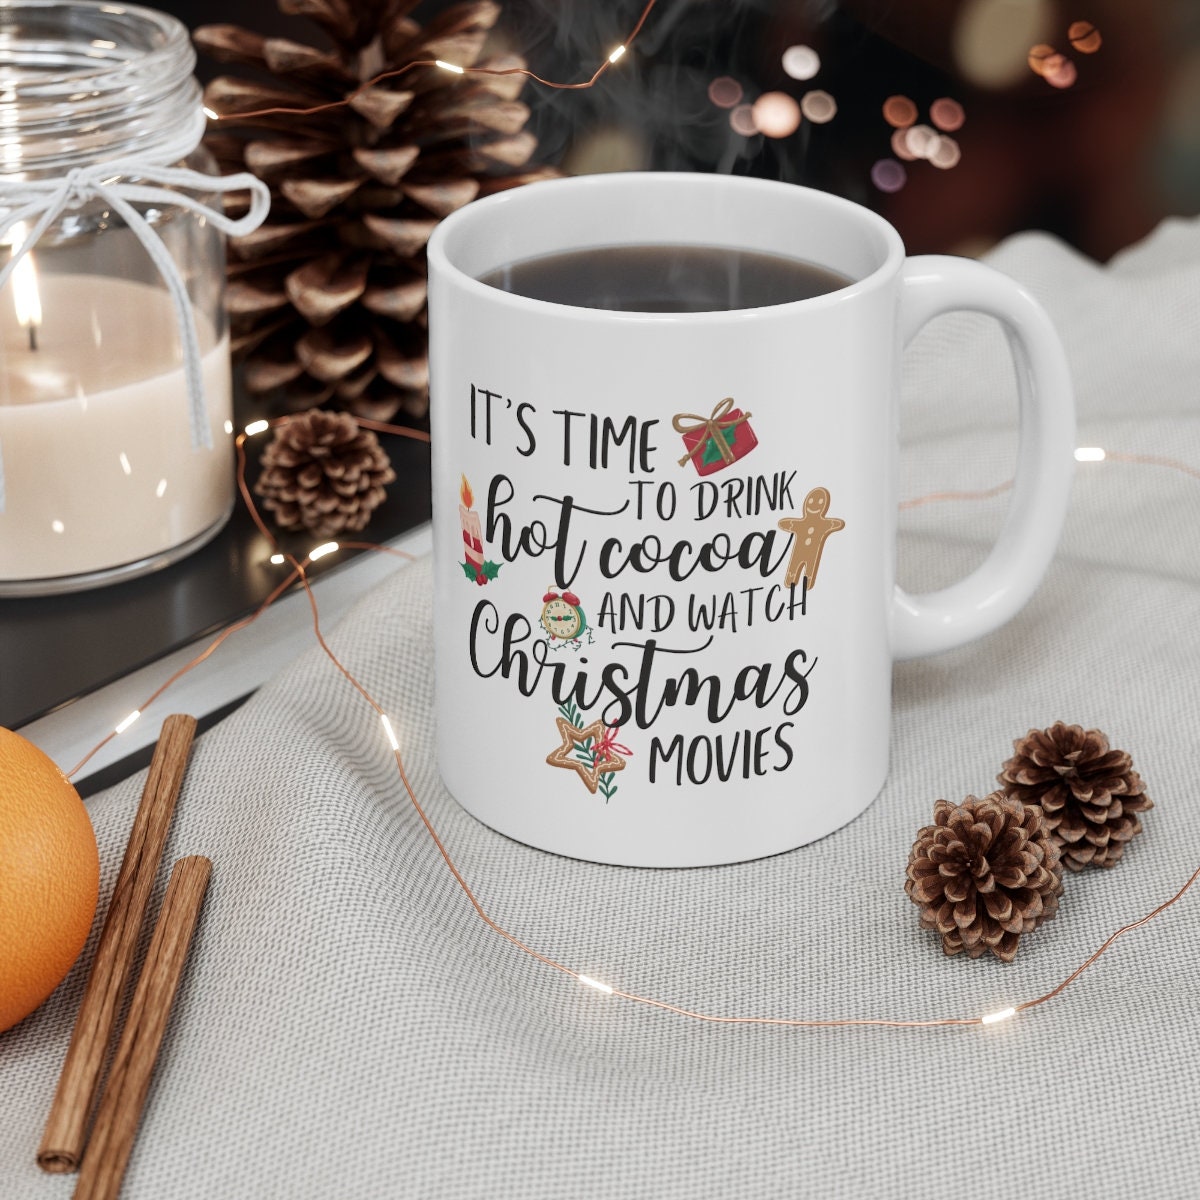 So Many Pets Personalized Elf Christmas Movie Tumbler, Hot Cocoa, Xmas Gift  For Adults Woman Men Fri…See more So Many Pets Personalized Elf Christmas